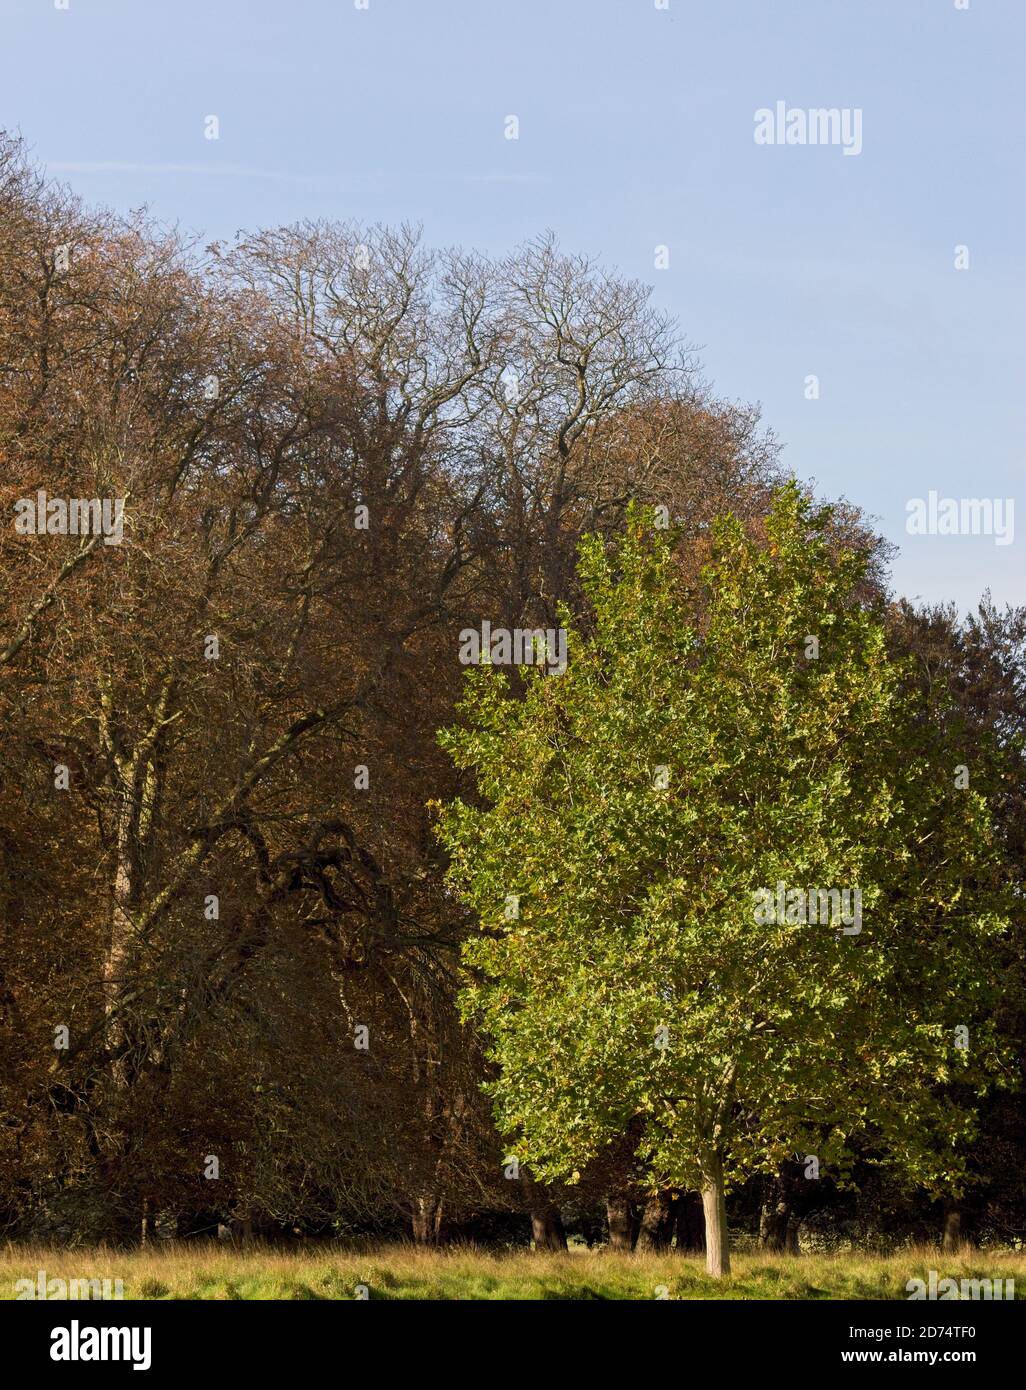 Autumnal trees in Holkham Hall grounds. Portrait format. Stock Photo